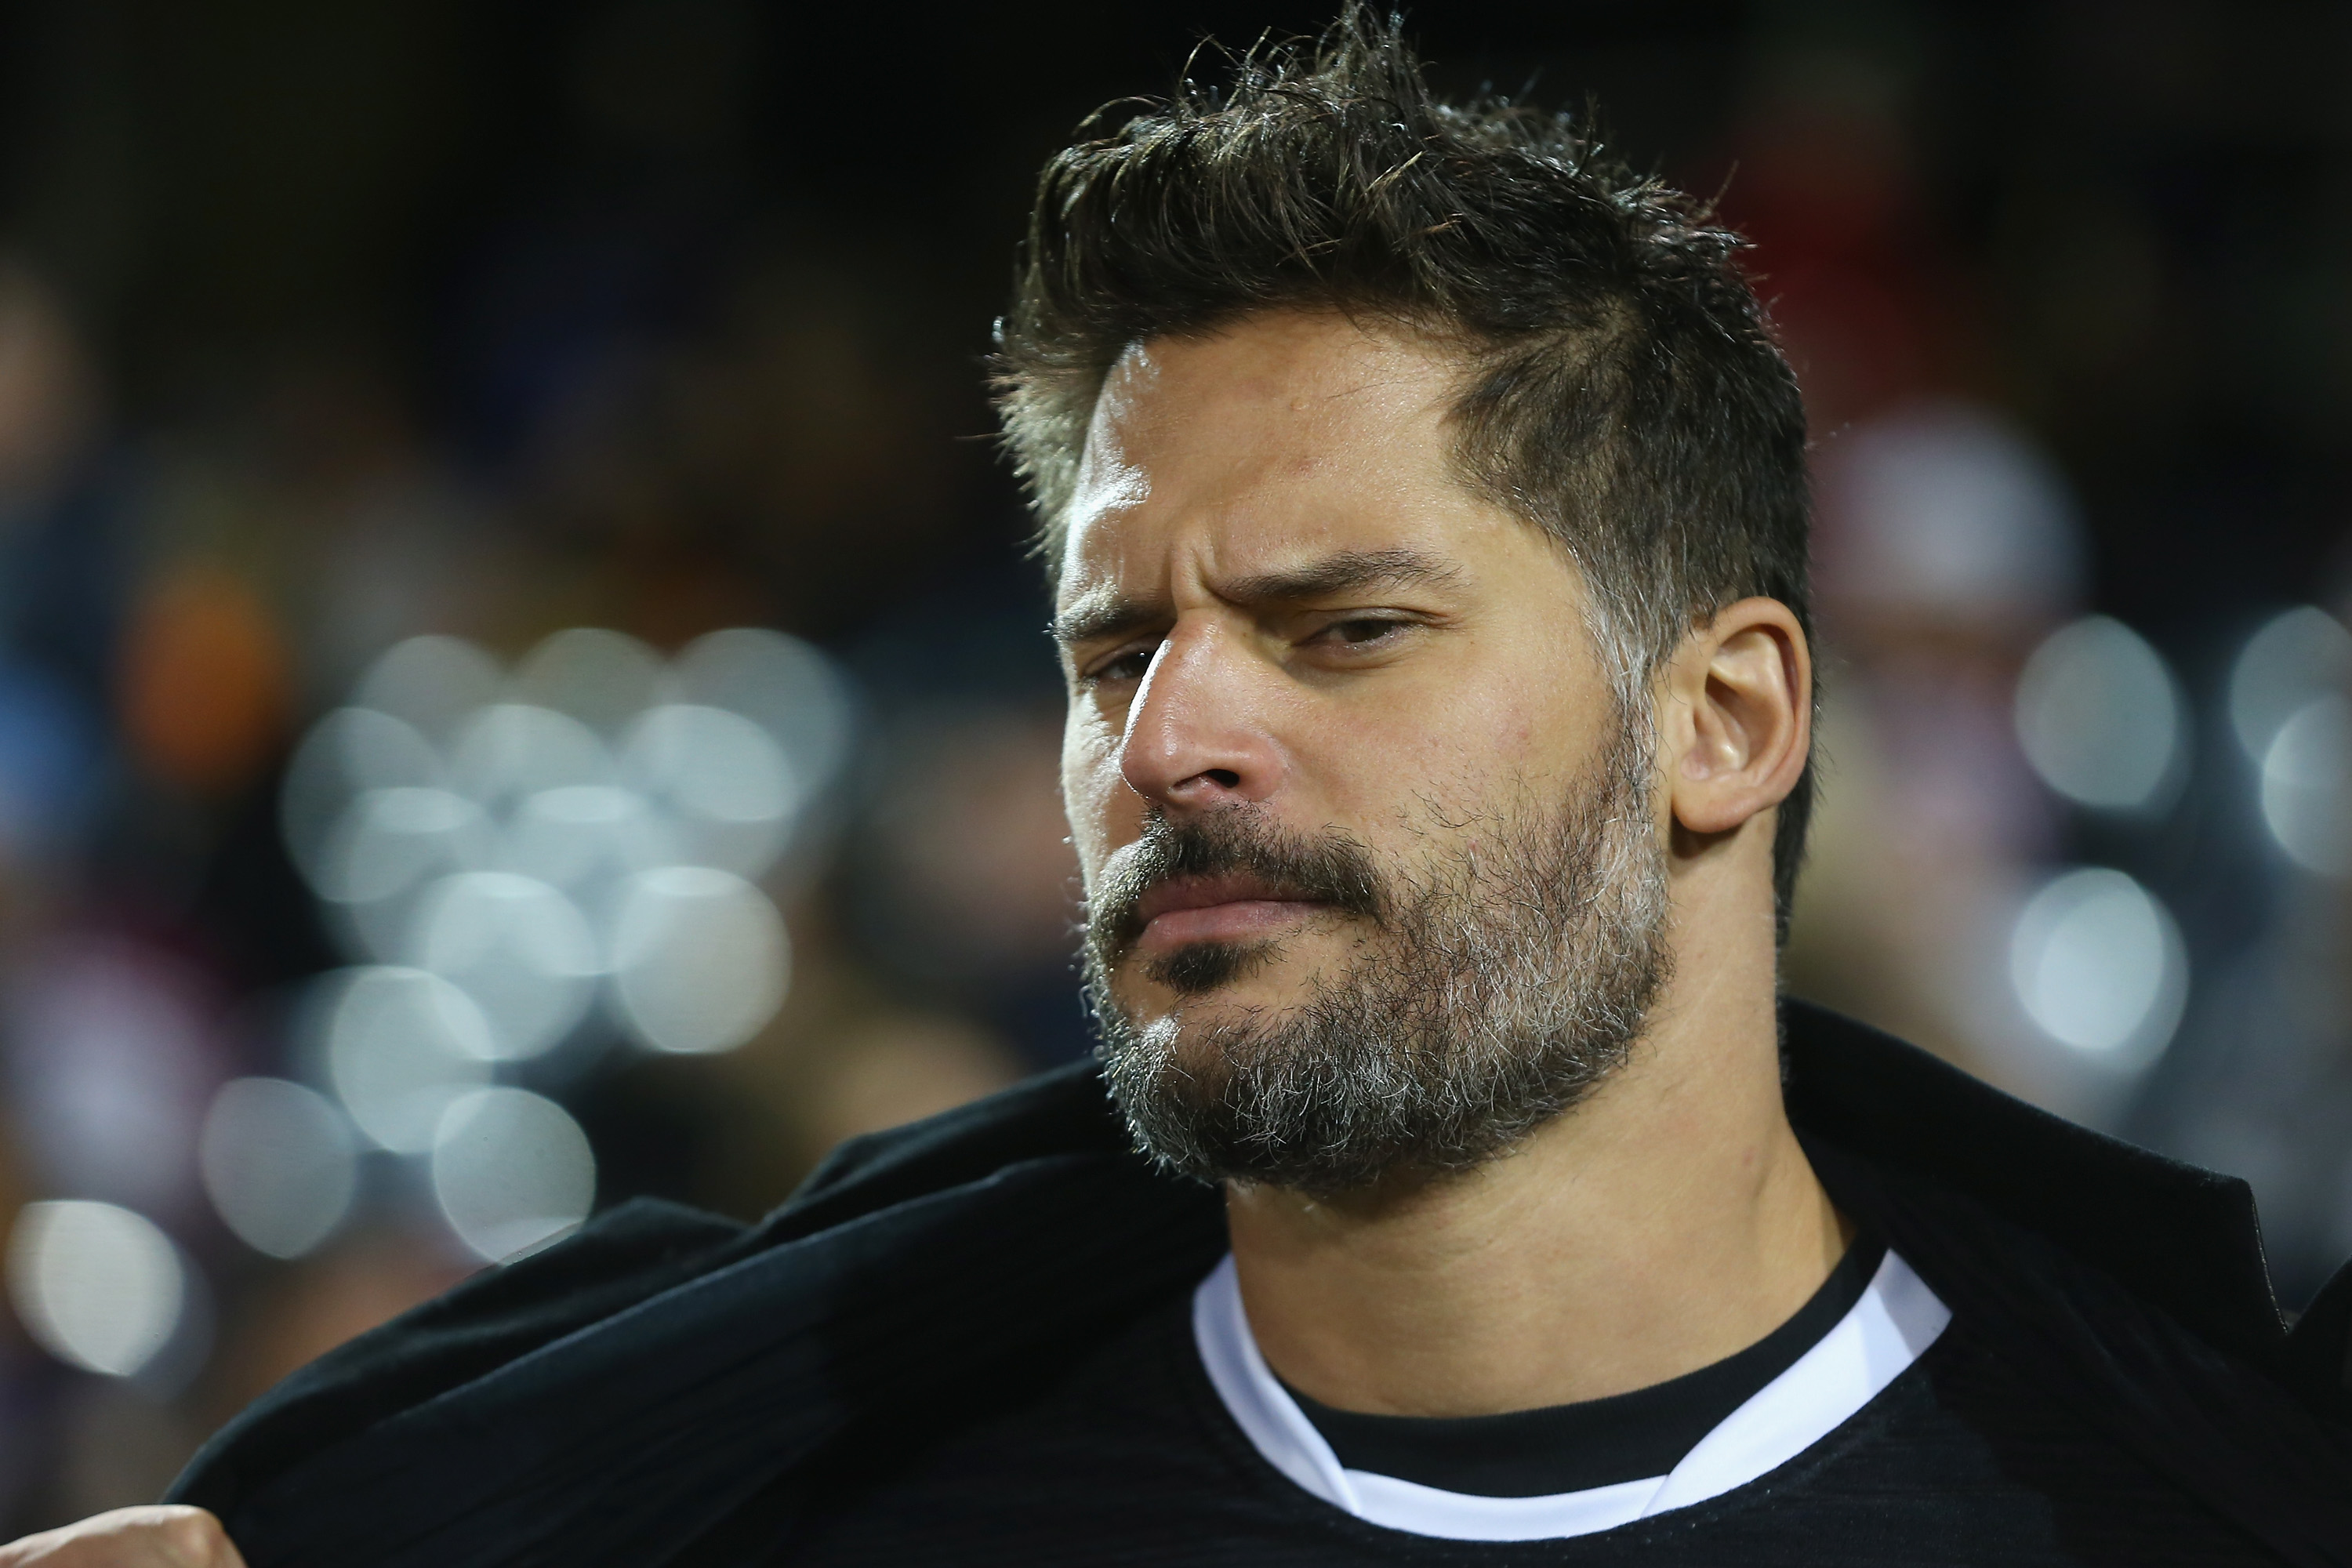 Joe Manganiello attends a match between the Wests Tigers and the Manly Sea Eagles on July 29, 2013 in Sydney, Australia | Source: Getty Images